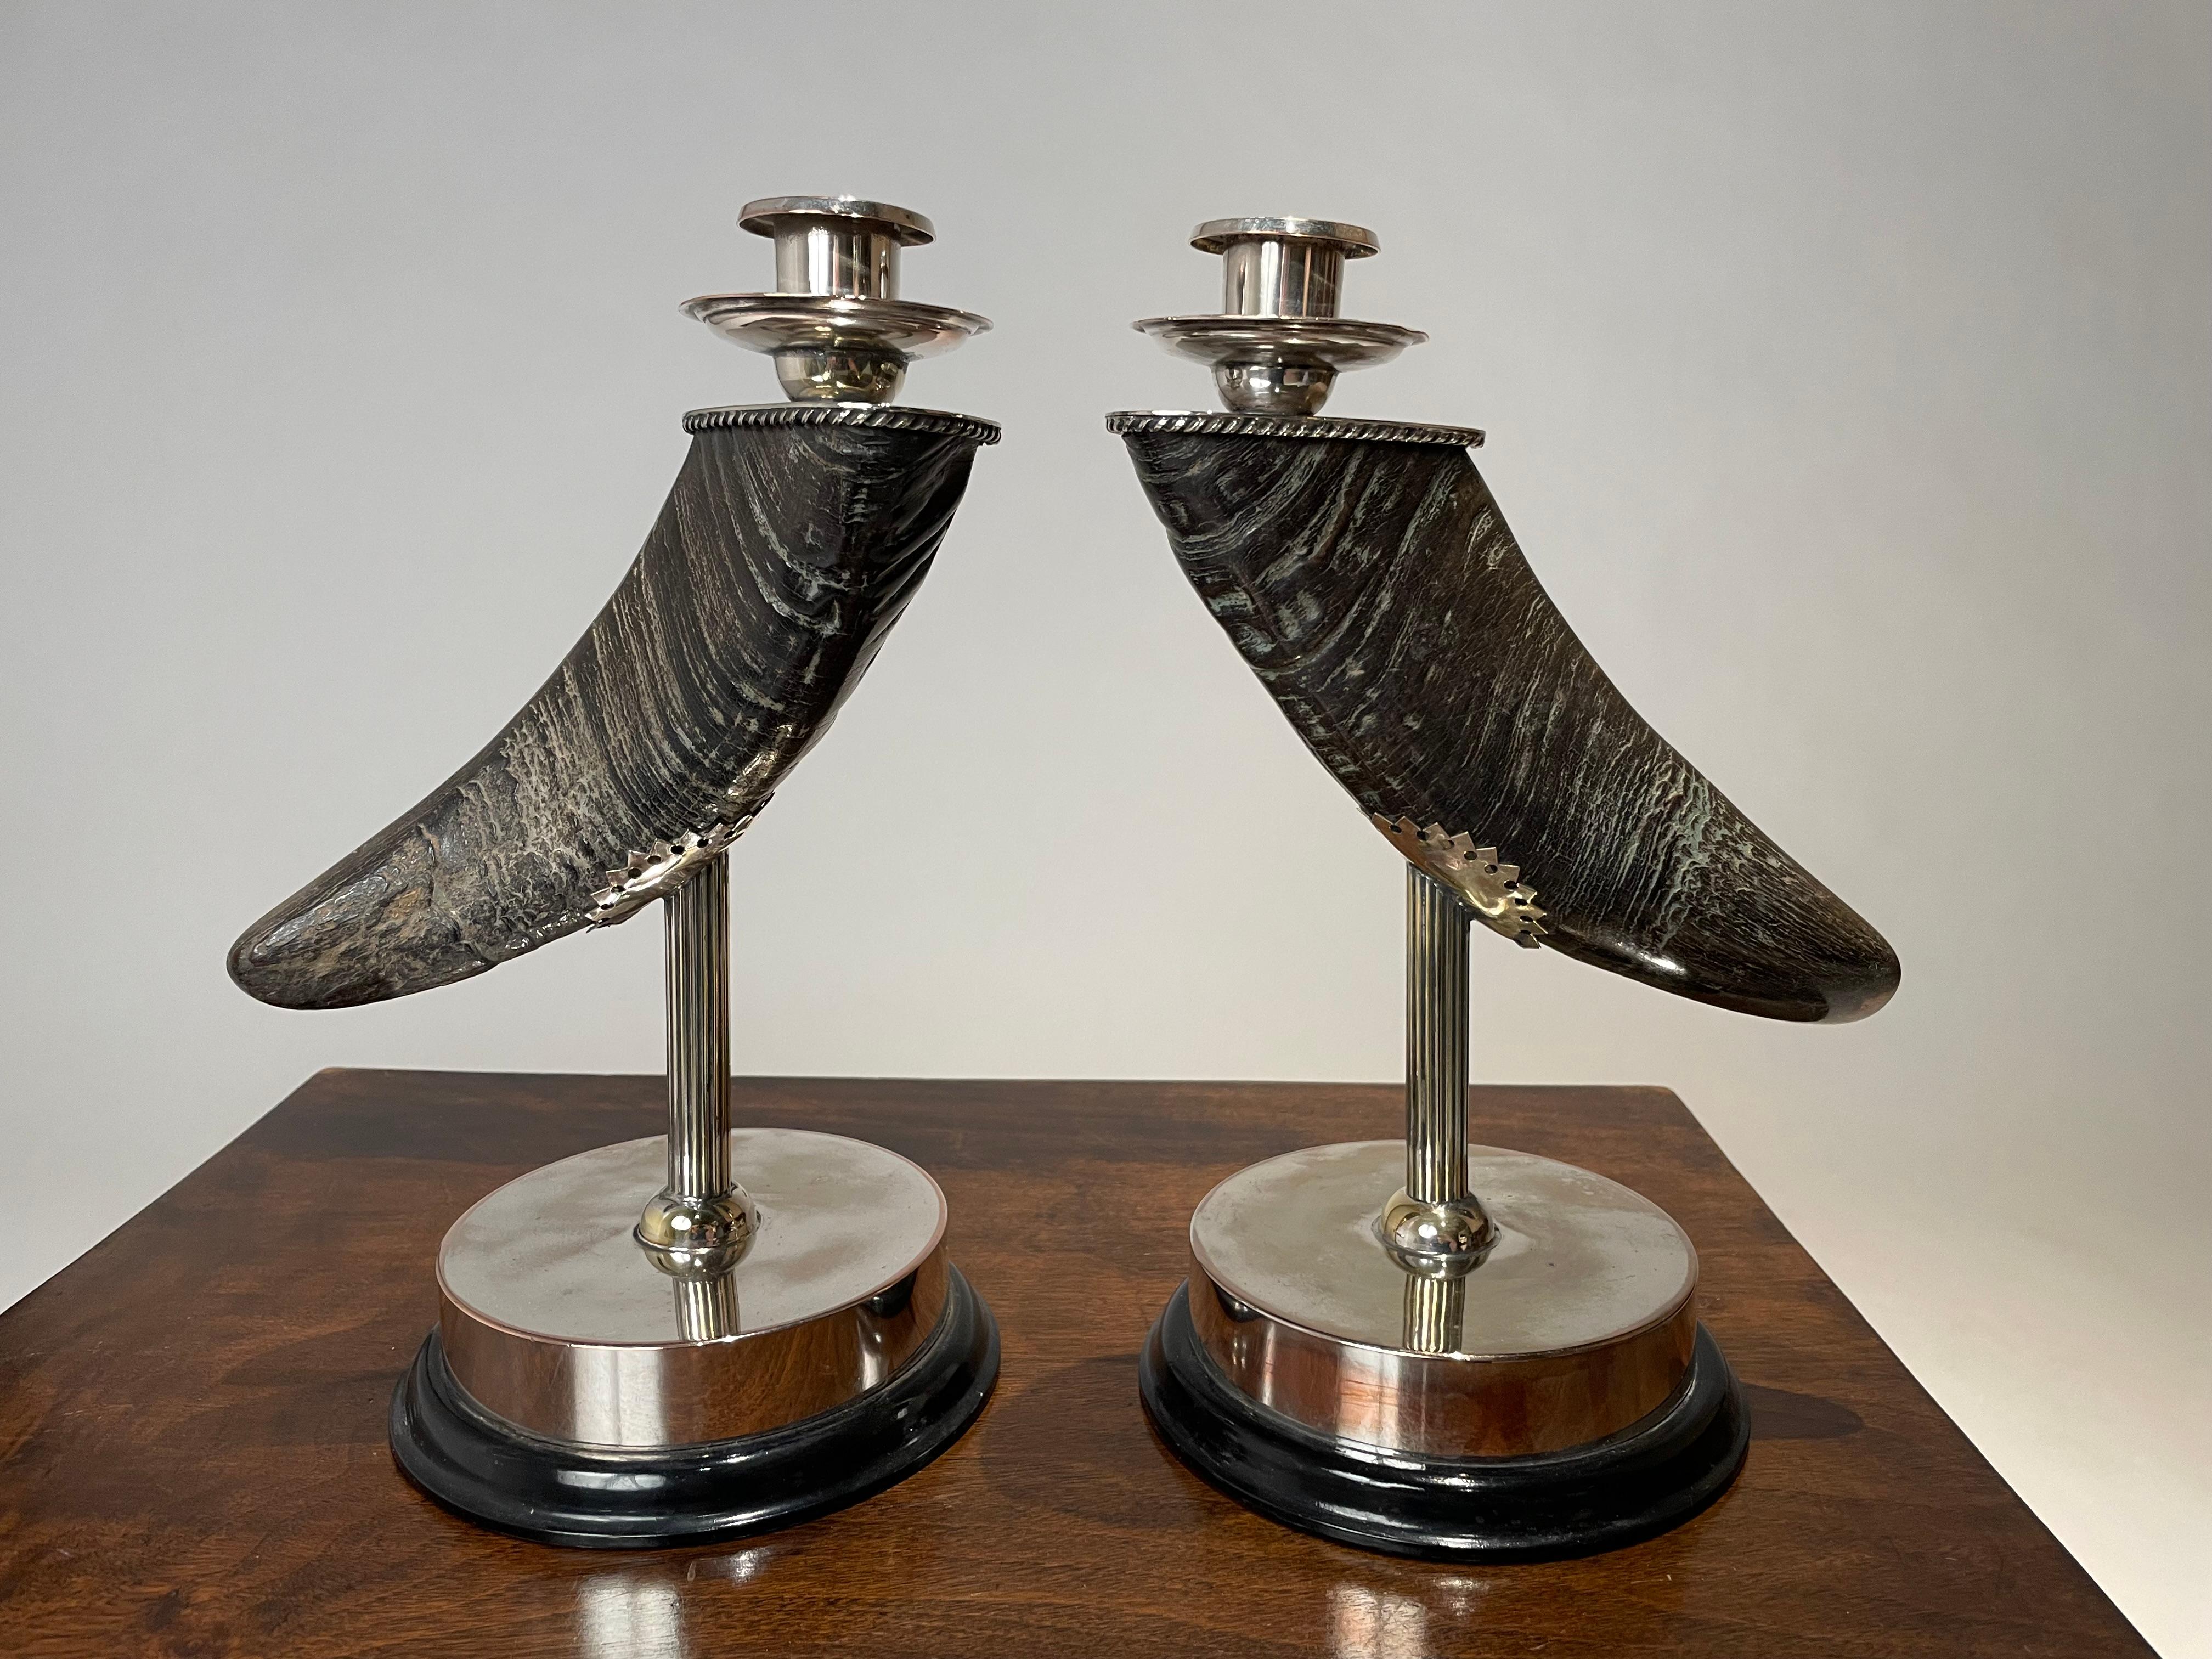 Great looking pair of silver plated horn candlesticks with black lacquered wood bases. The horns, possibly water buffalo, have a wonderful color and patina. Mounted on silver plated columns supported by circular black lacquer bases. An unusual and